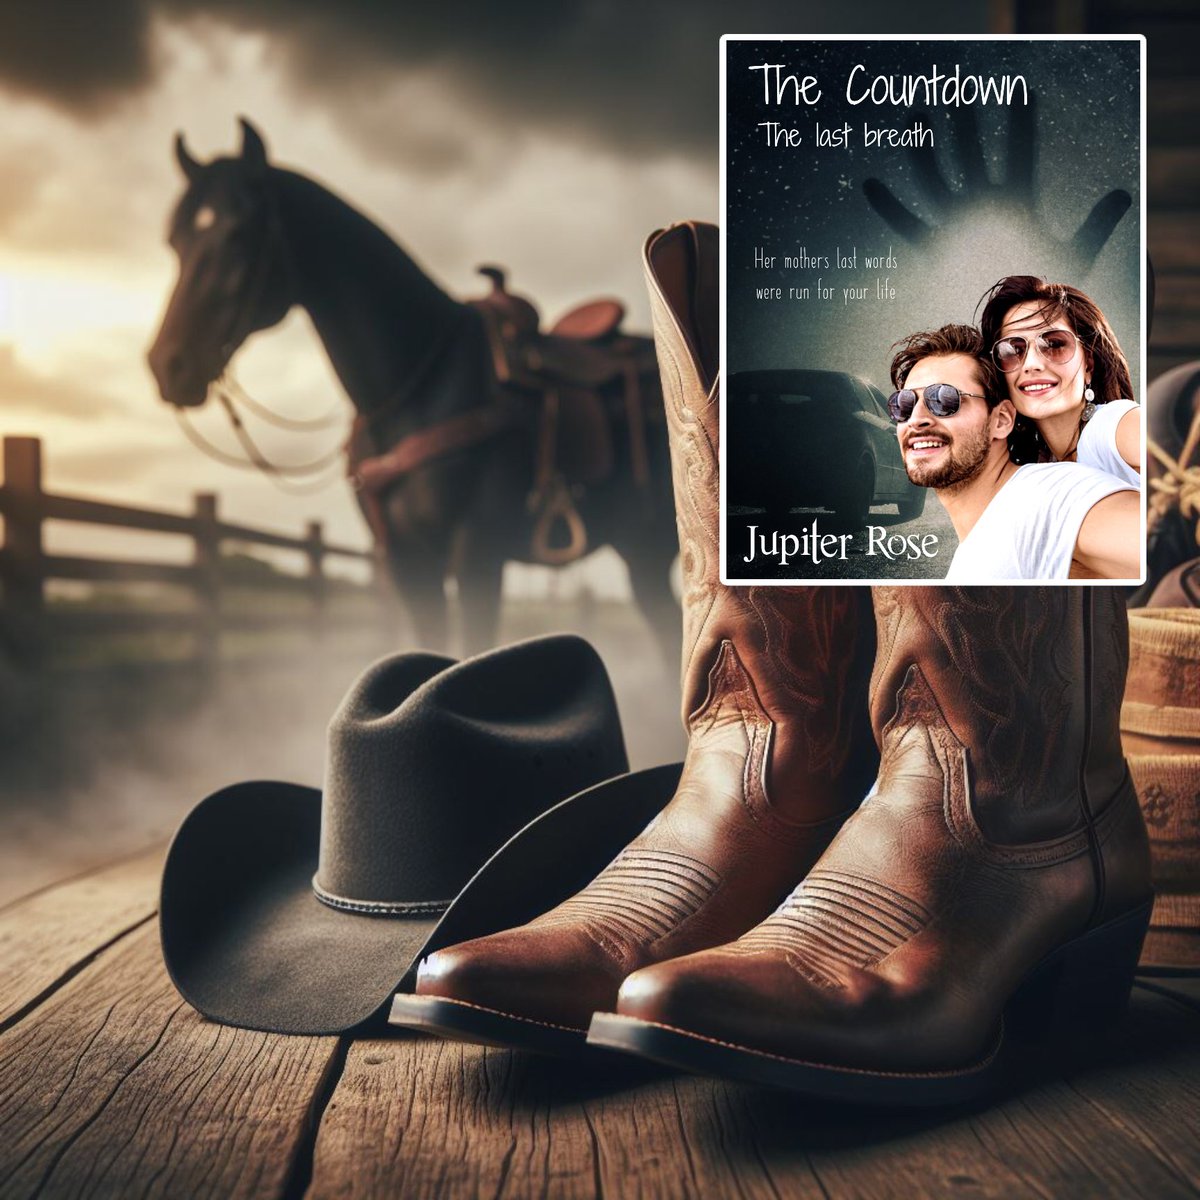 #Bookpassage #readers #Romanticsuspense #crimesuspense #KindleUnlimited #Paperback Justice tiptoed up to the office door, setting her ear to the thin wall. She wondered if her father was awake. In a deep, gruff voice, Marcus spoke. 'I can hear you sneaking around outside my